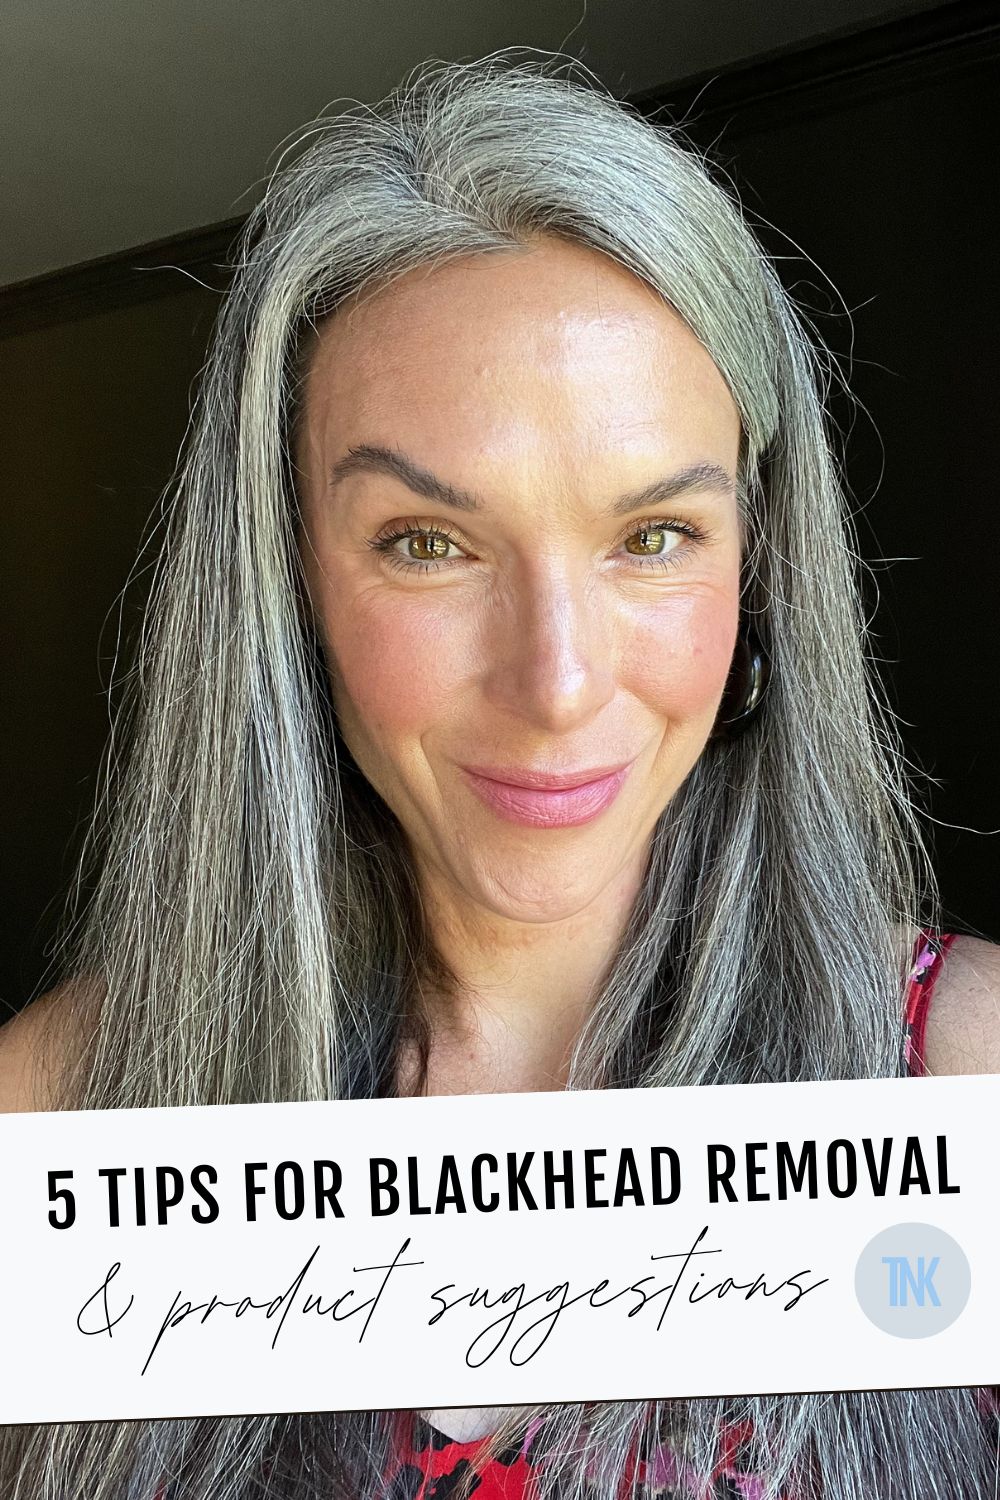 5 Tips for Blackhead Removal (+ Product Suggestions!) The New Knew